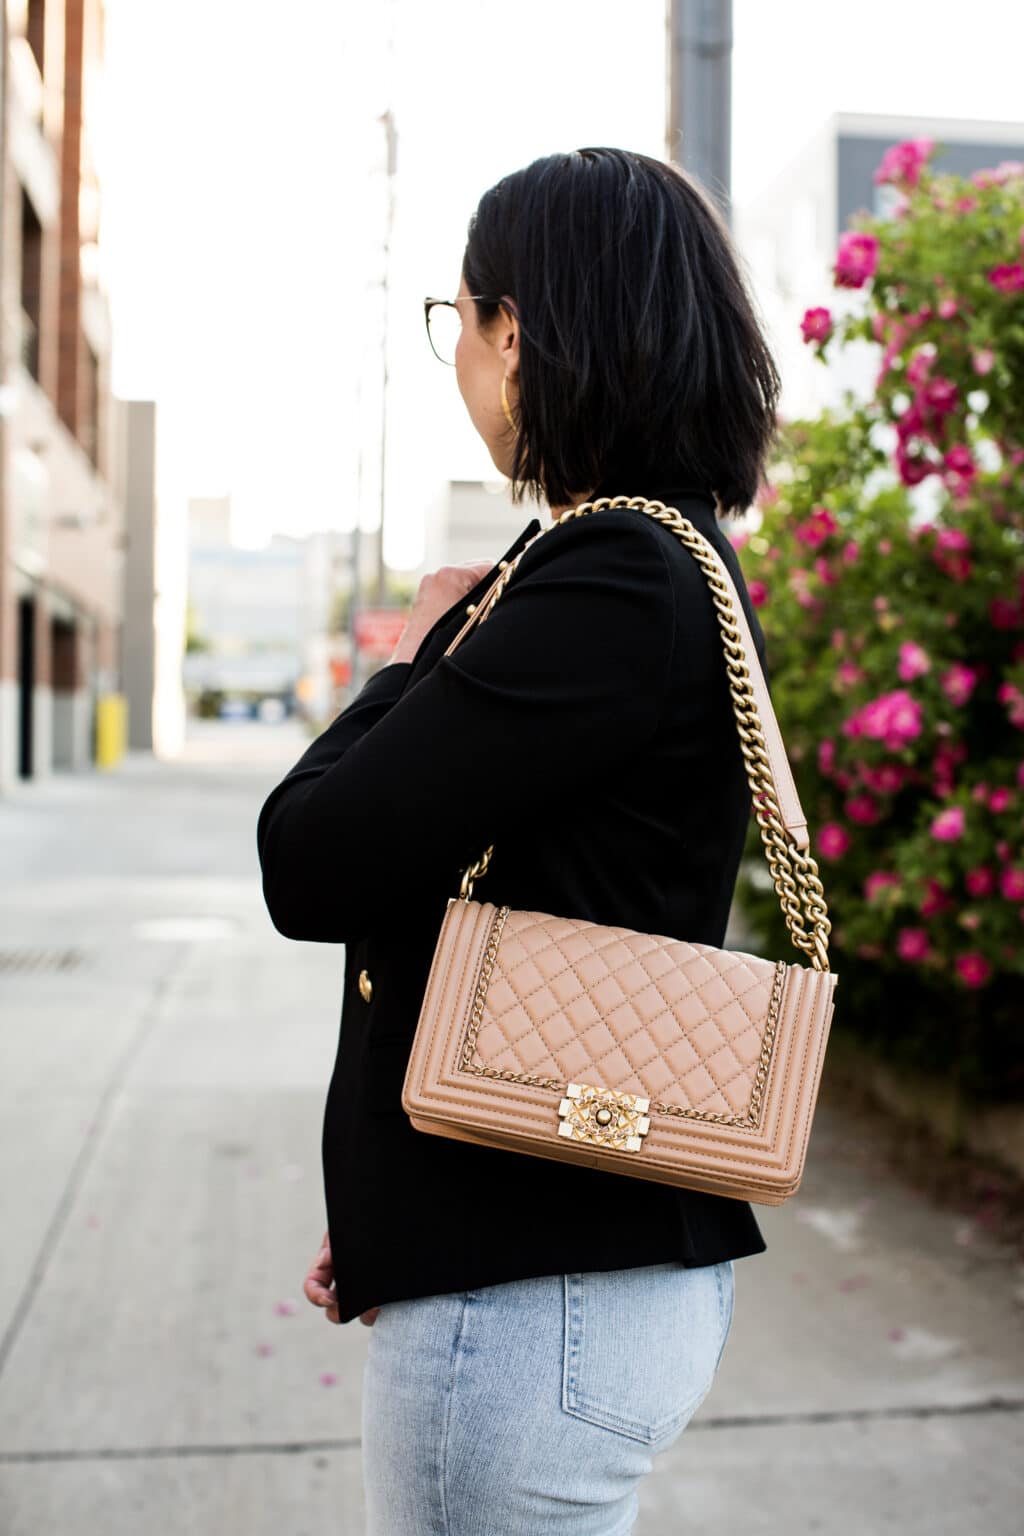 Lindsey of Have Clothes, Will Travel showing a pink Chanel boy bag paired with a black blazer and jeans